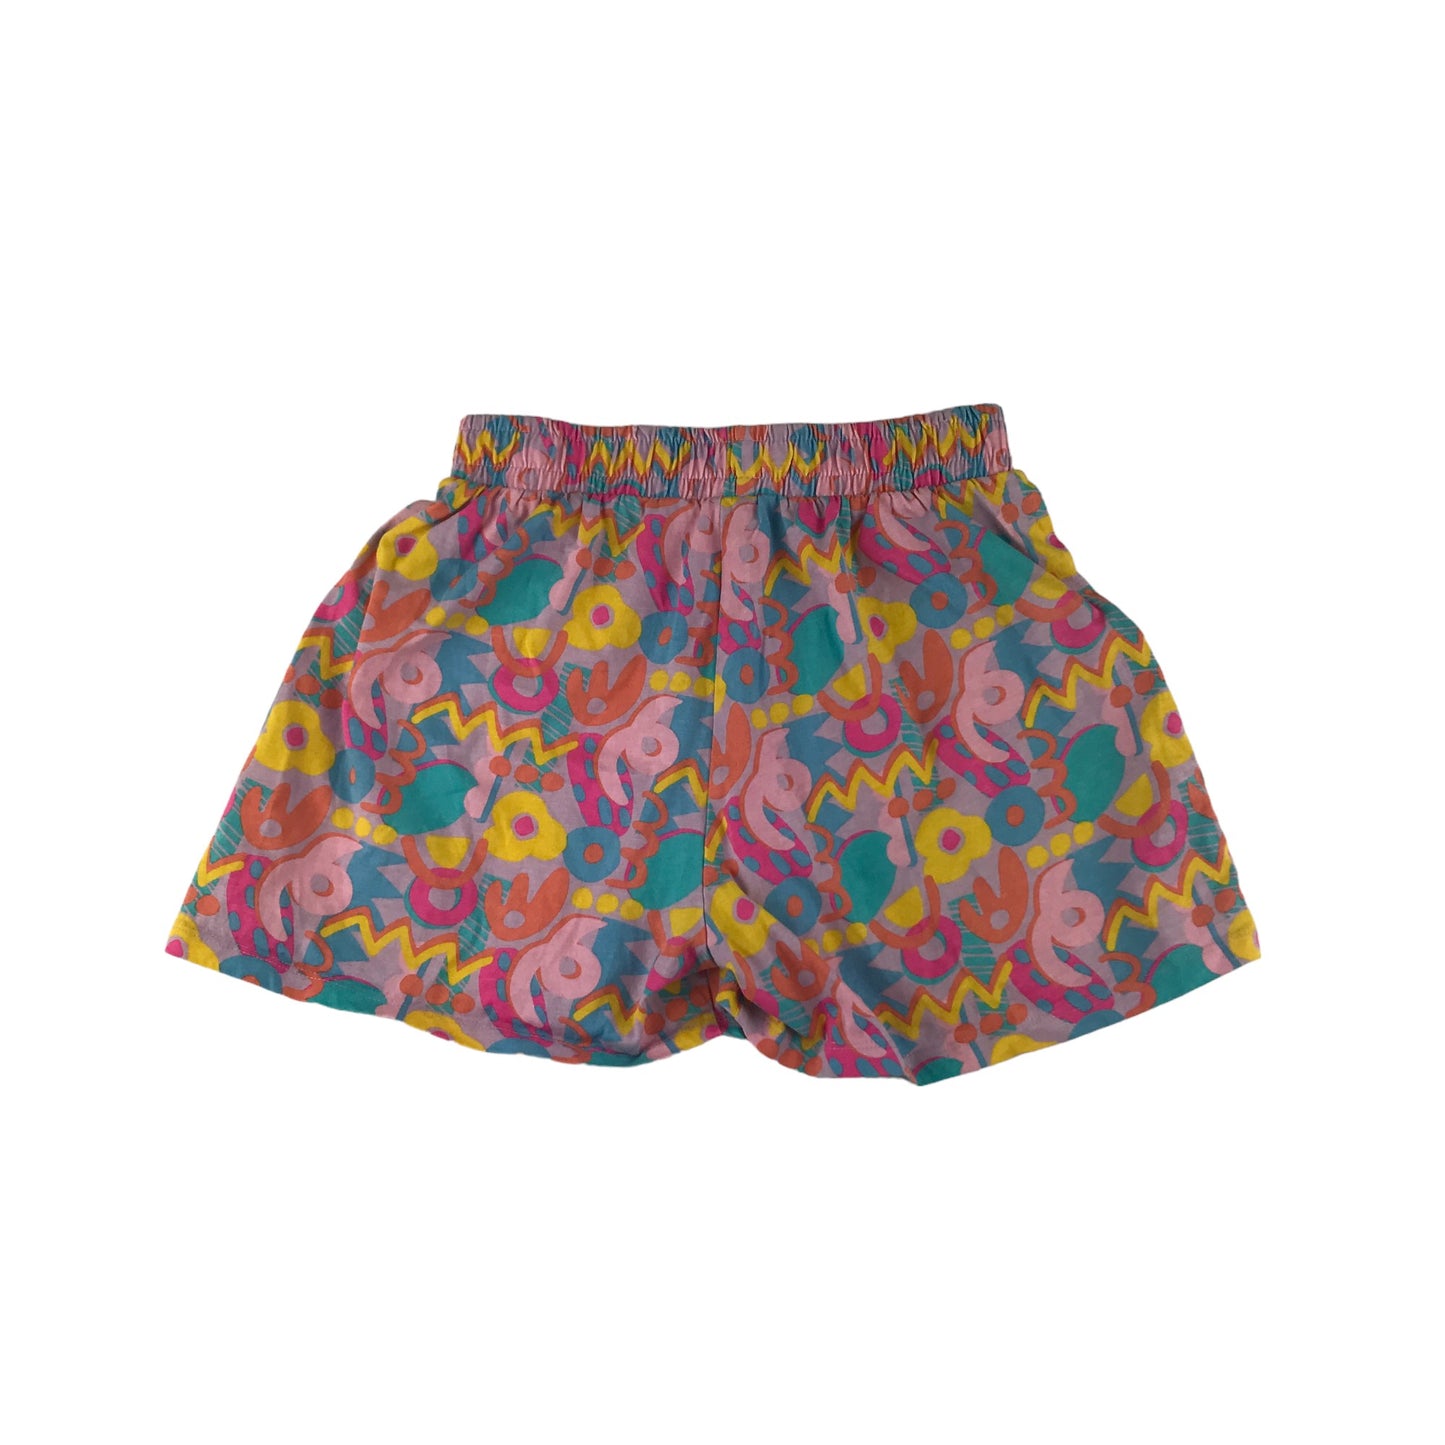 Dunnes Stores Shorts Age 8 Multicolour Graphic Print Pattern